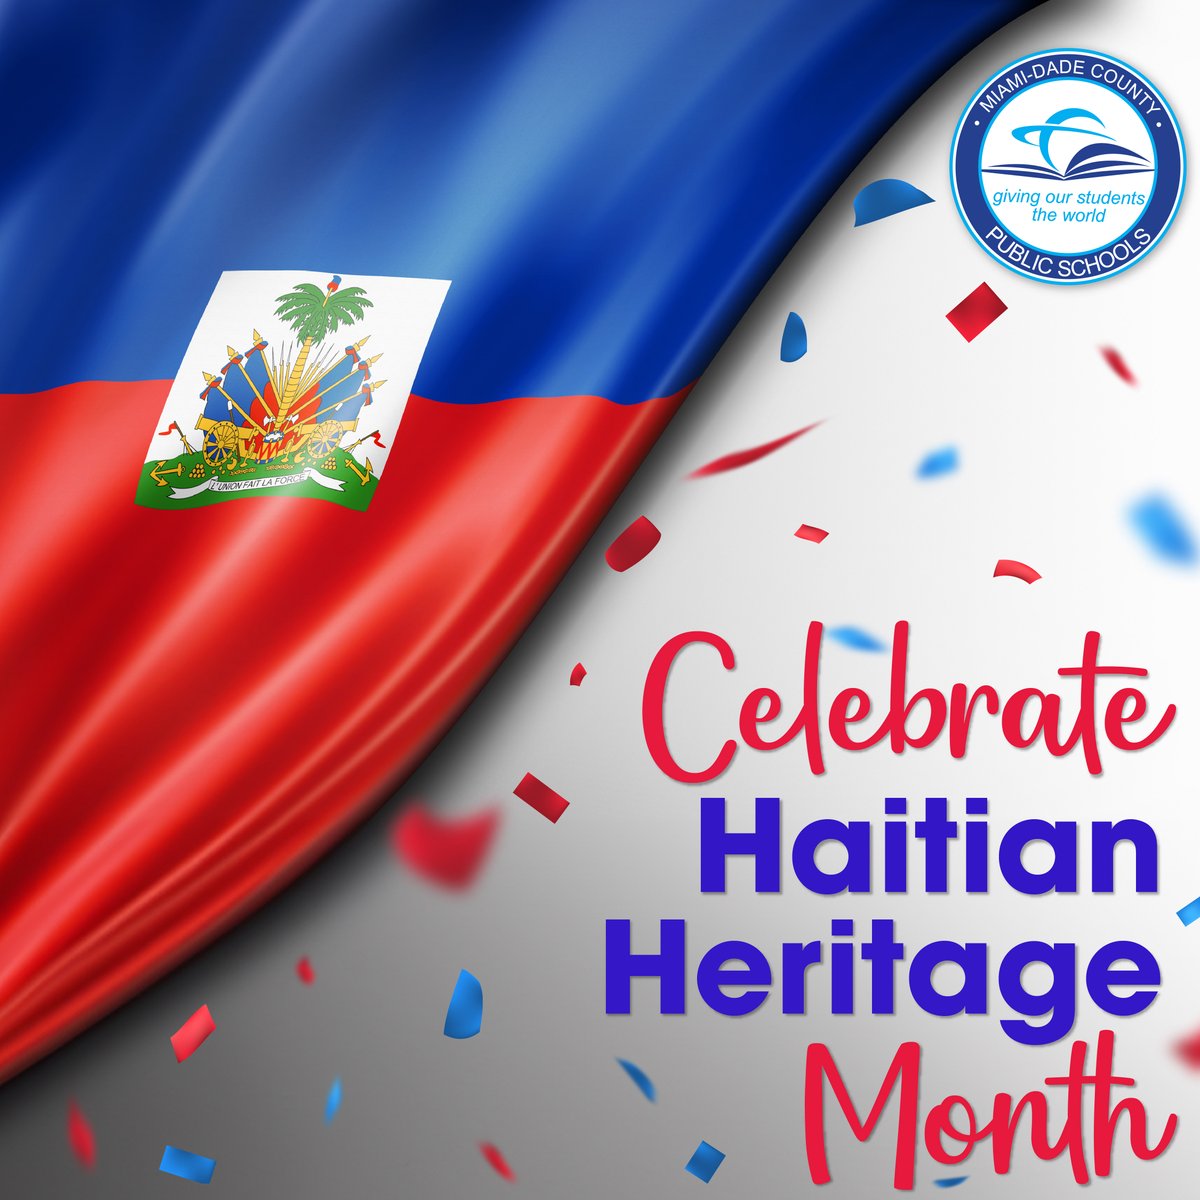 We celebrate the culture and history of Haiti throughout May for #HaitianHeritageMonth! Join @MDCPS in celebrating the vibrant traditions, contributions, and experiences of the Haitian community. #YourBestChoiceMDCPS